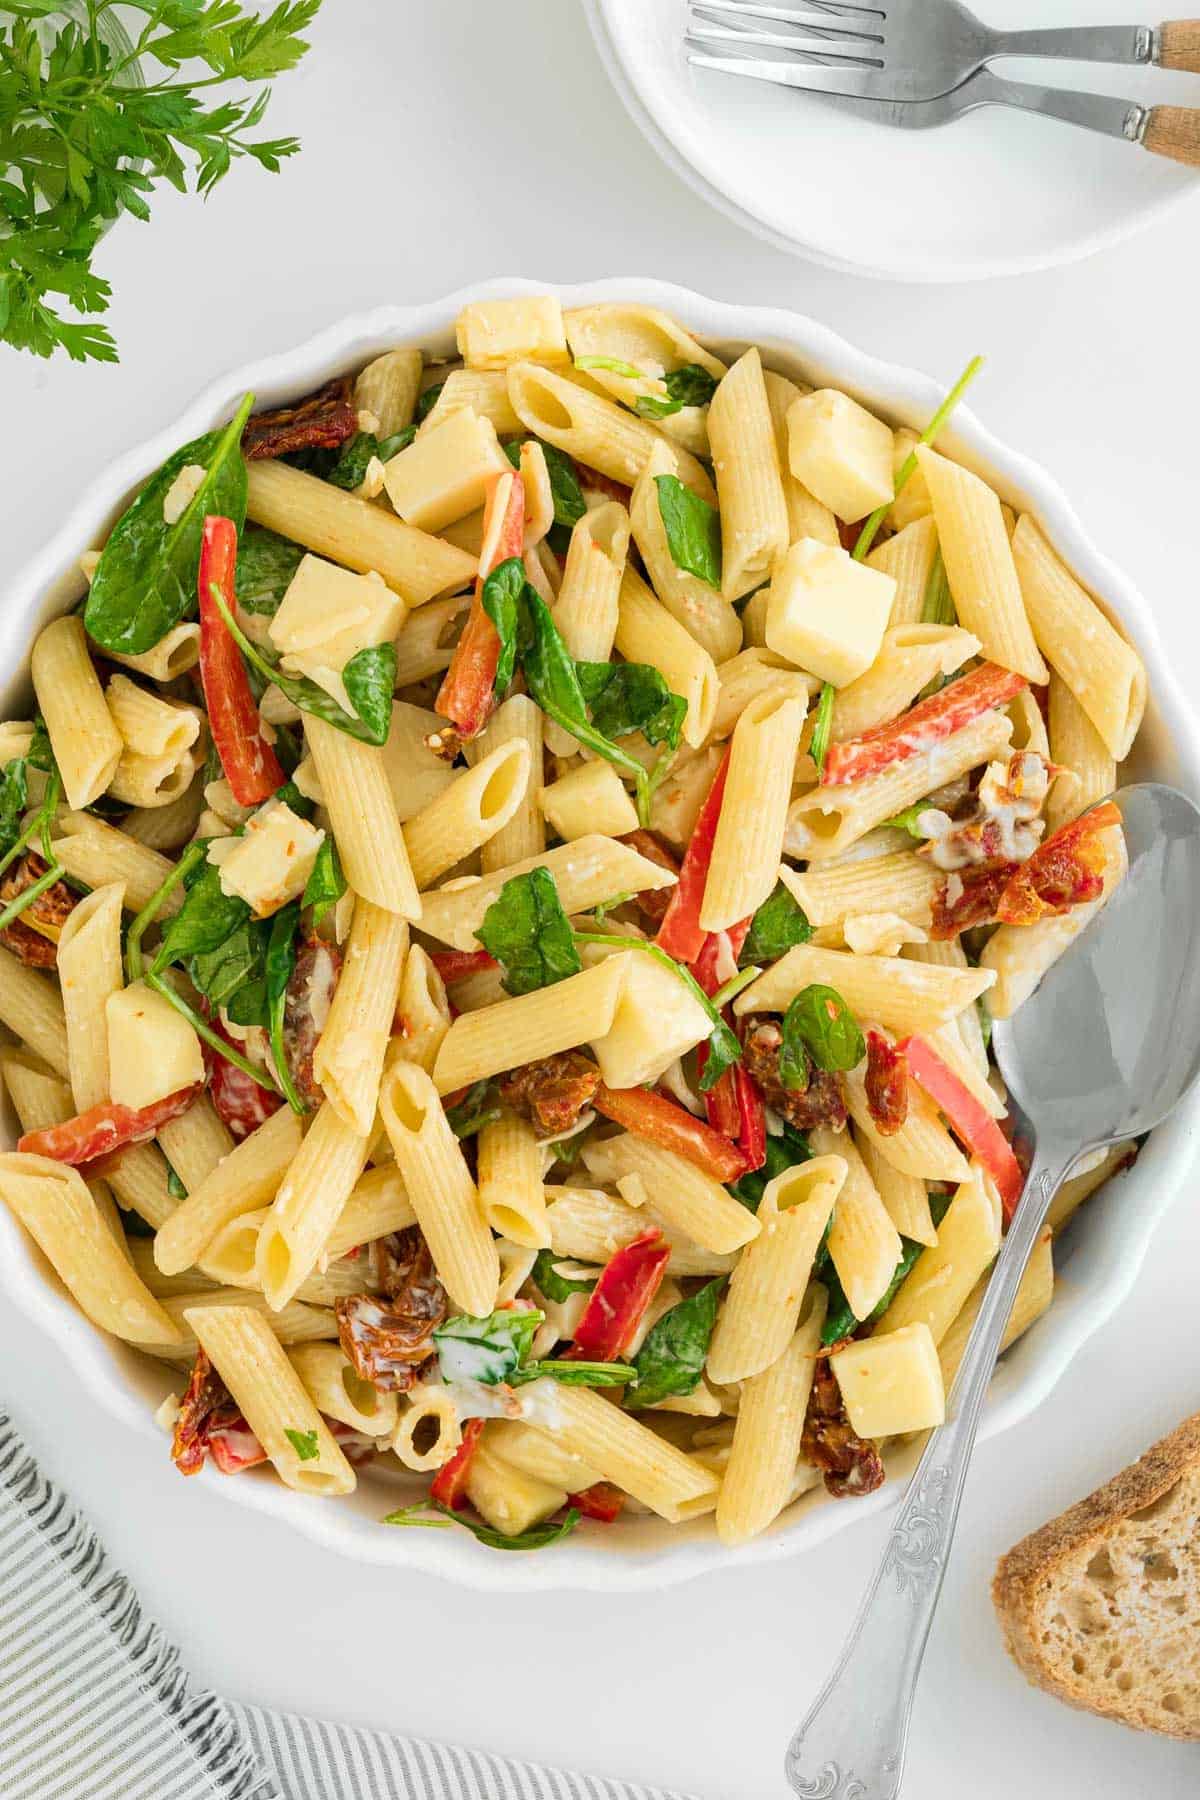 A bowl of penne pasta salad with spinach, sun-dried tomatoes, and cheese on a table with utensils and bread.